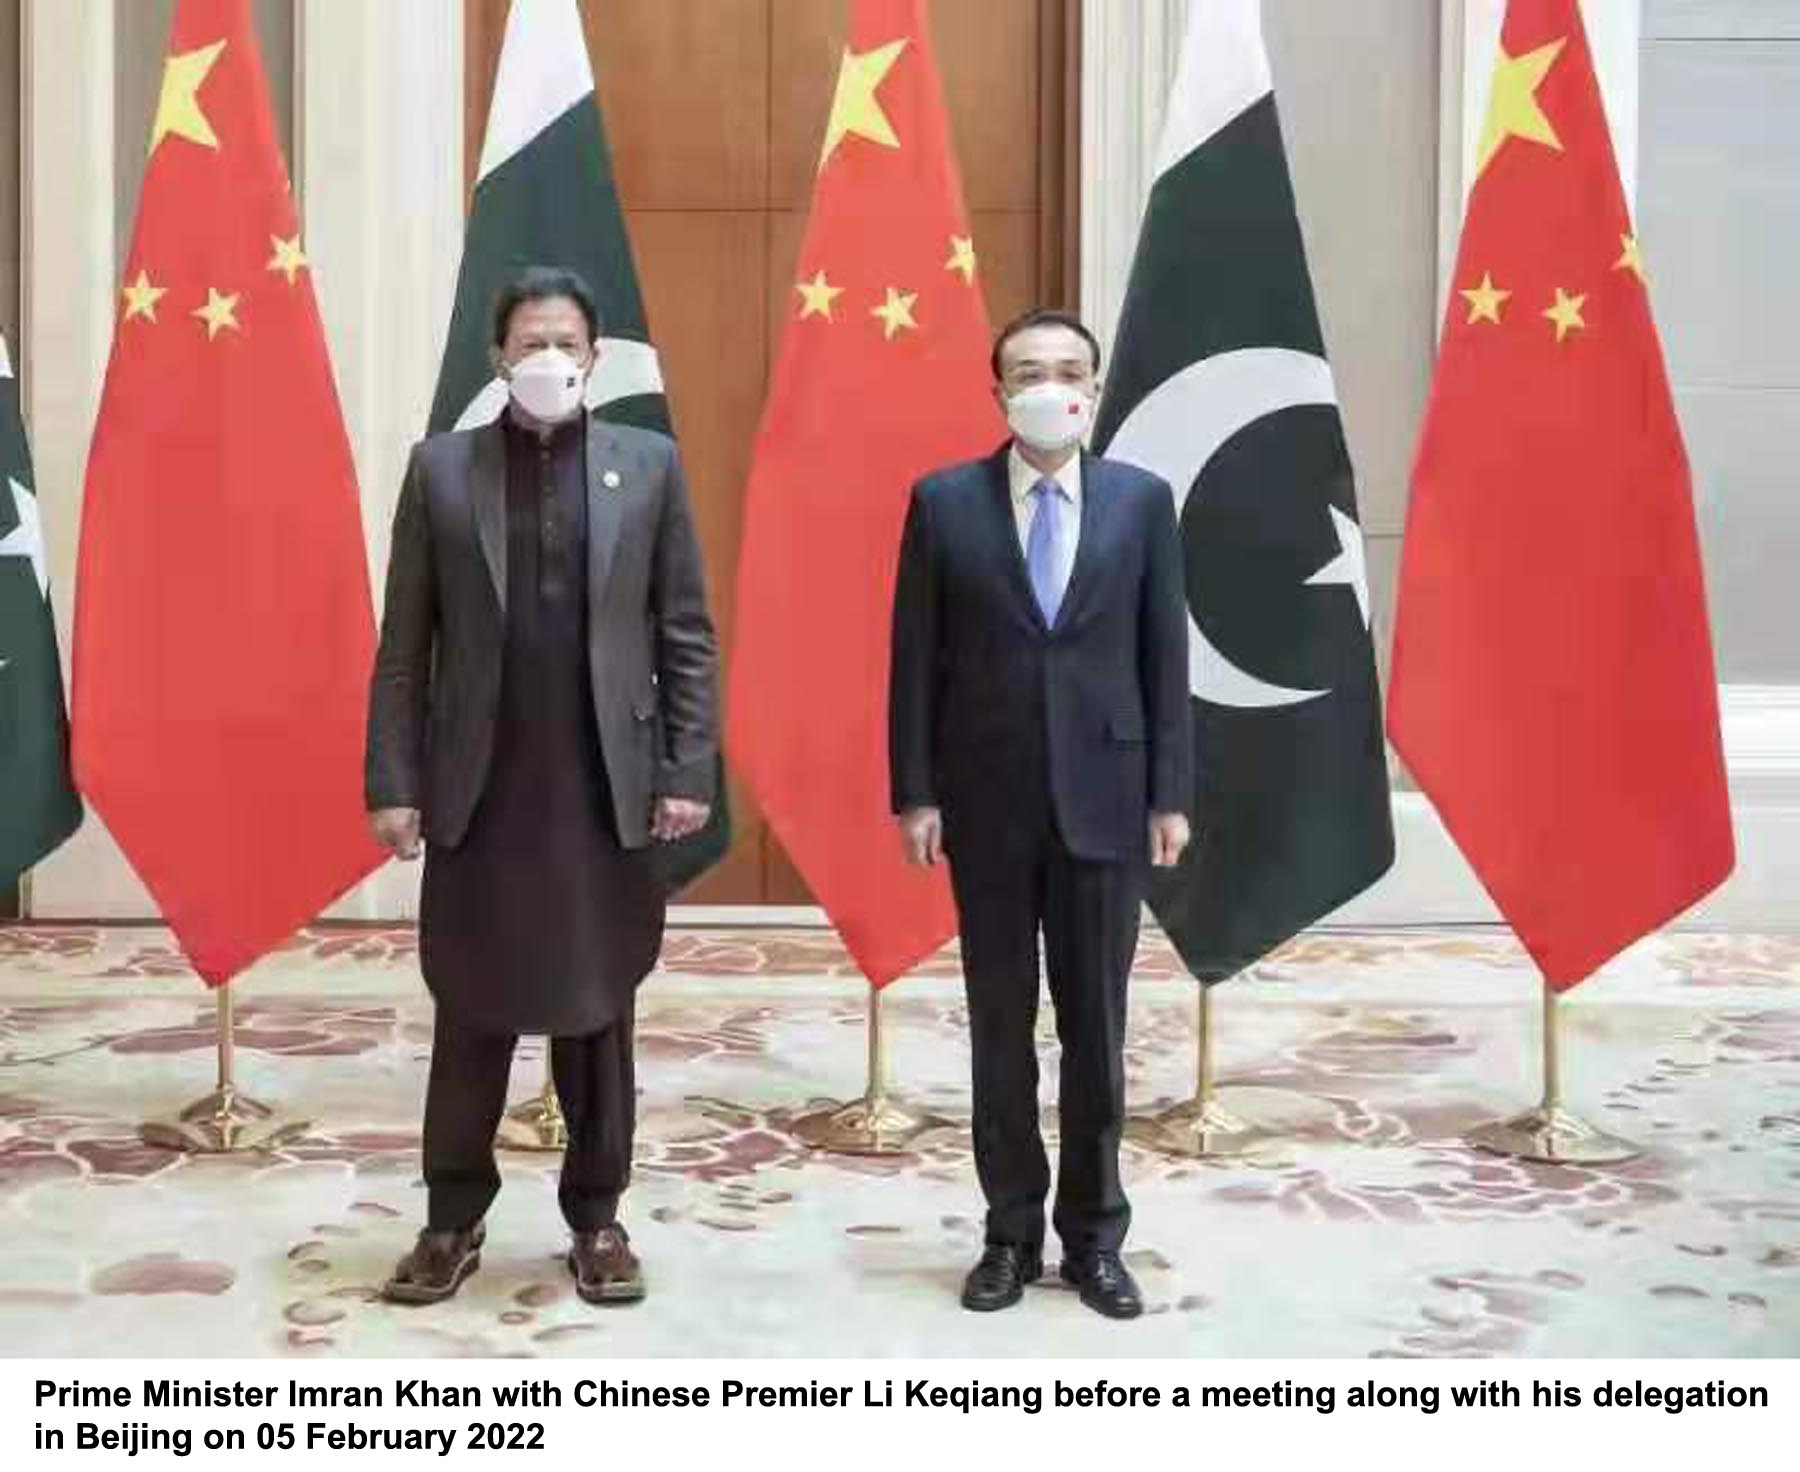 Prime Minister Imran Khan Visit to China in February 2022